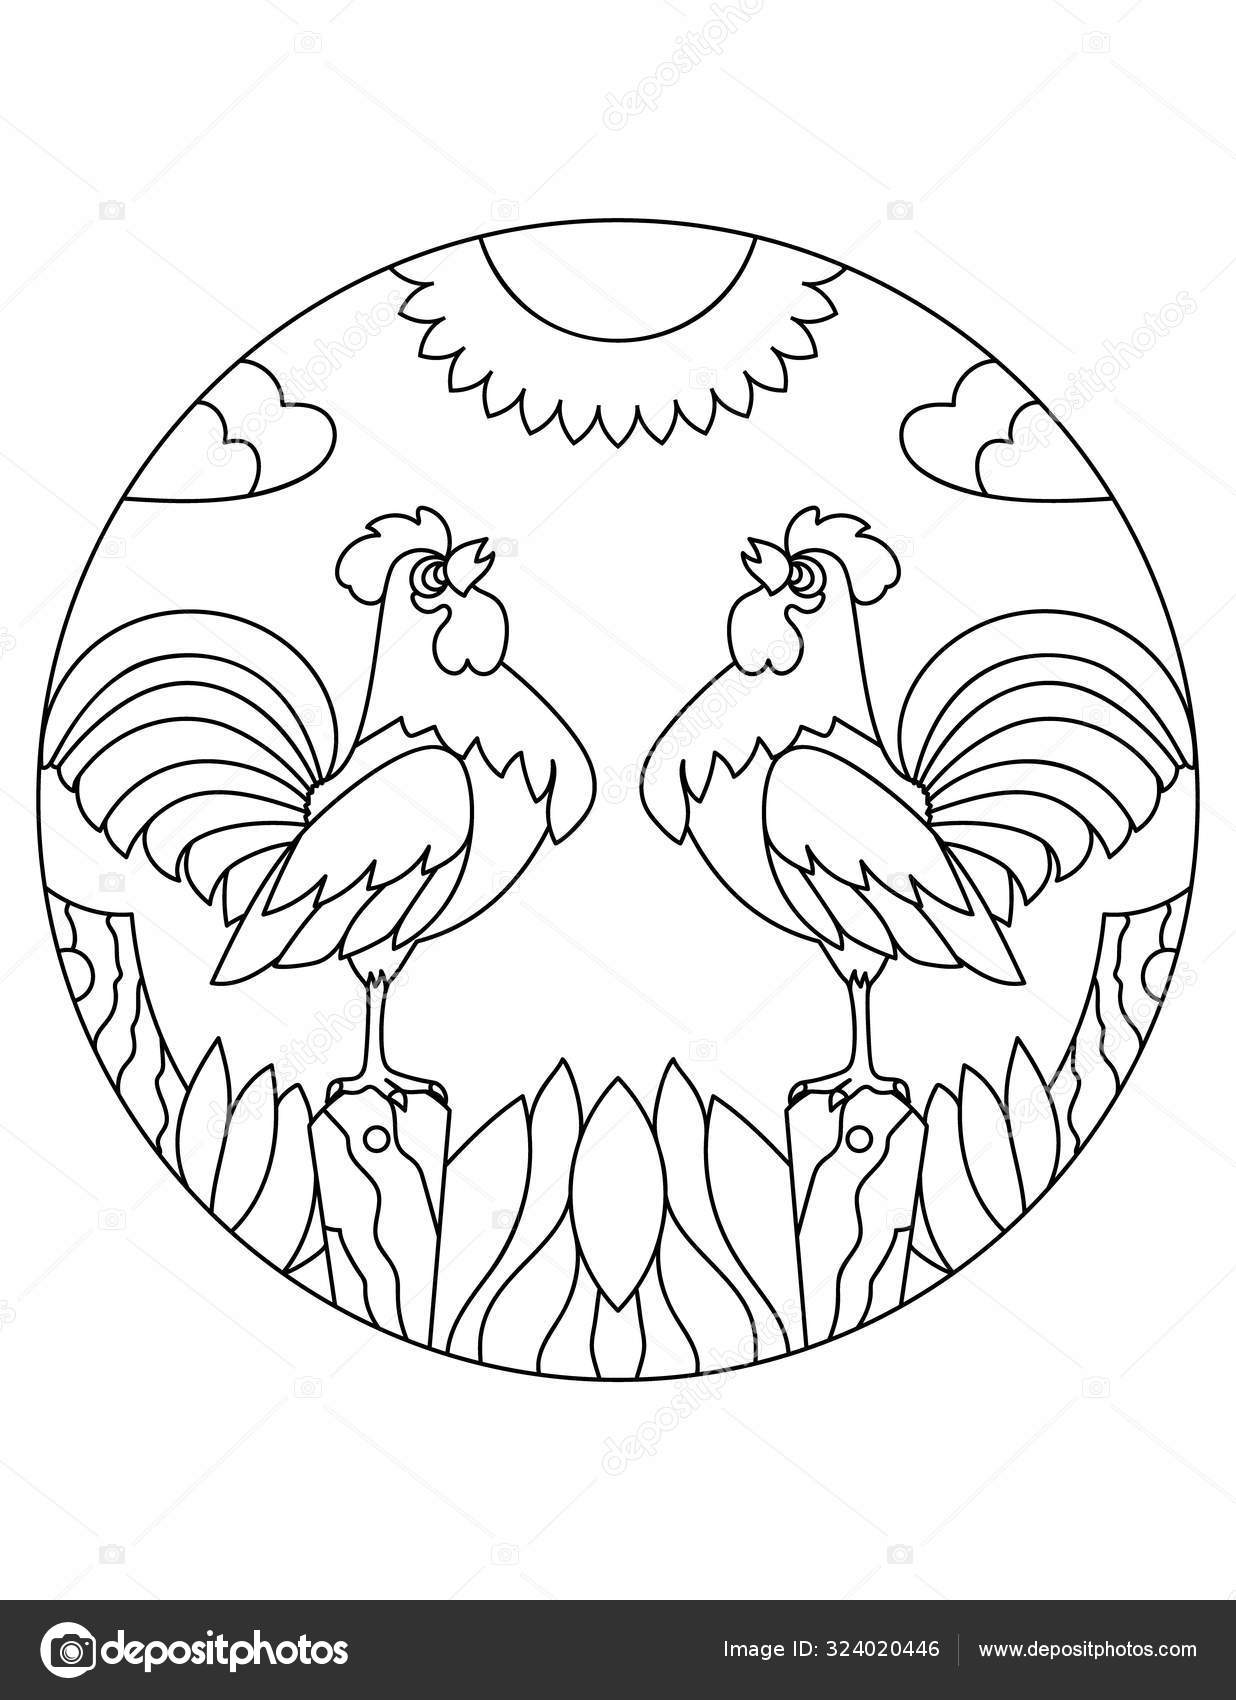 Rooster pattern illustration of roosters mandala with an animal roosters in a circular frame stock vector by bermoha